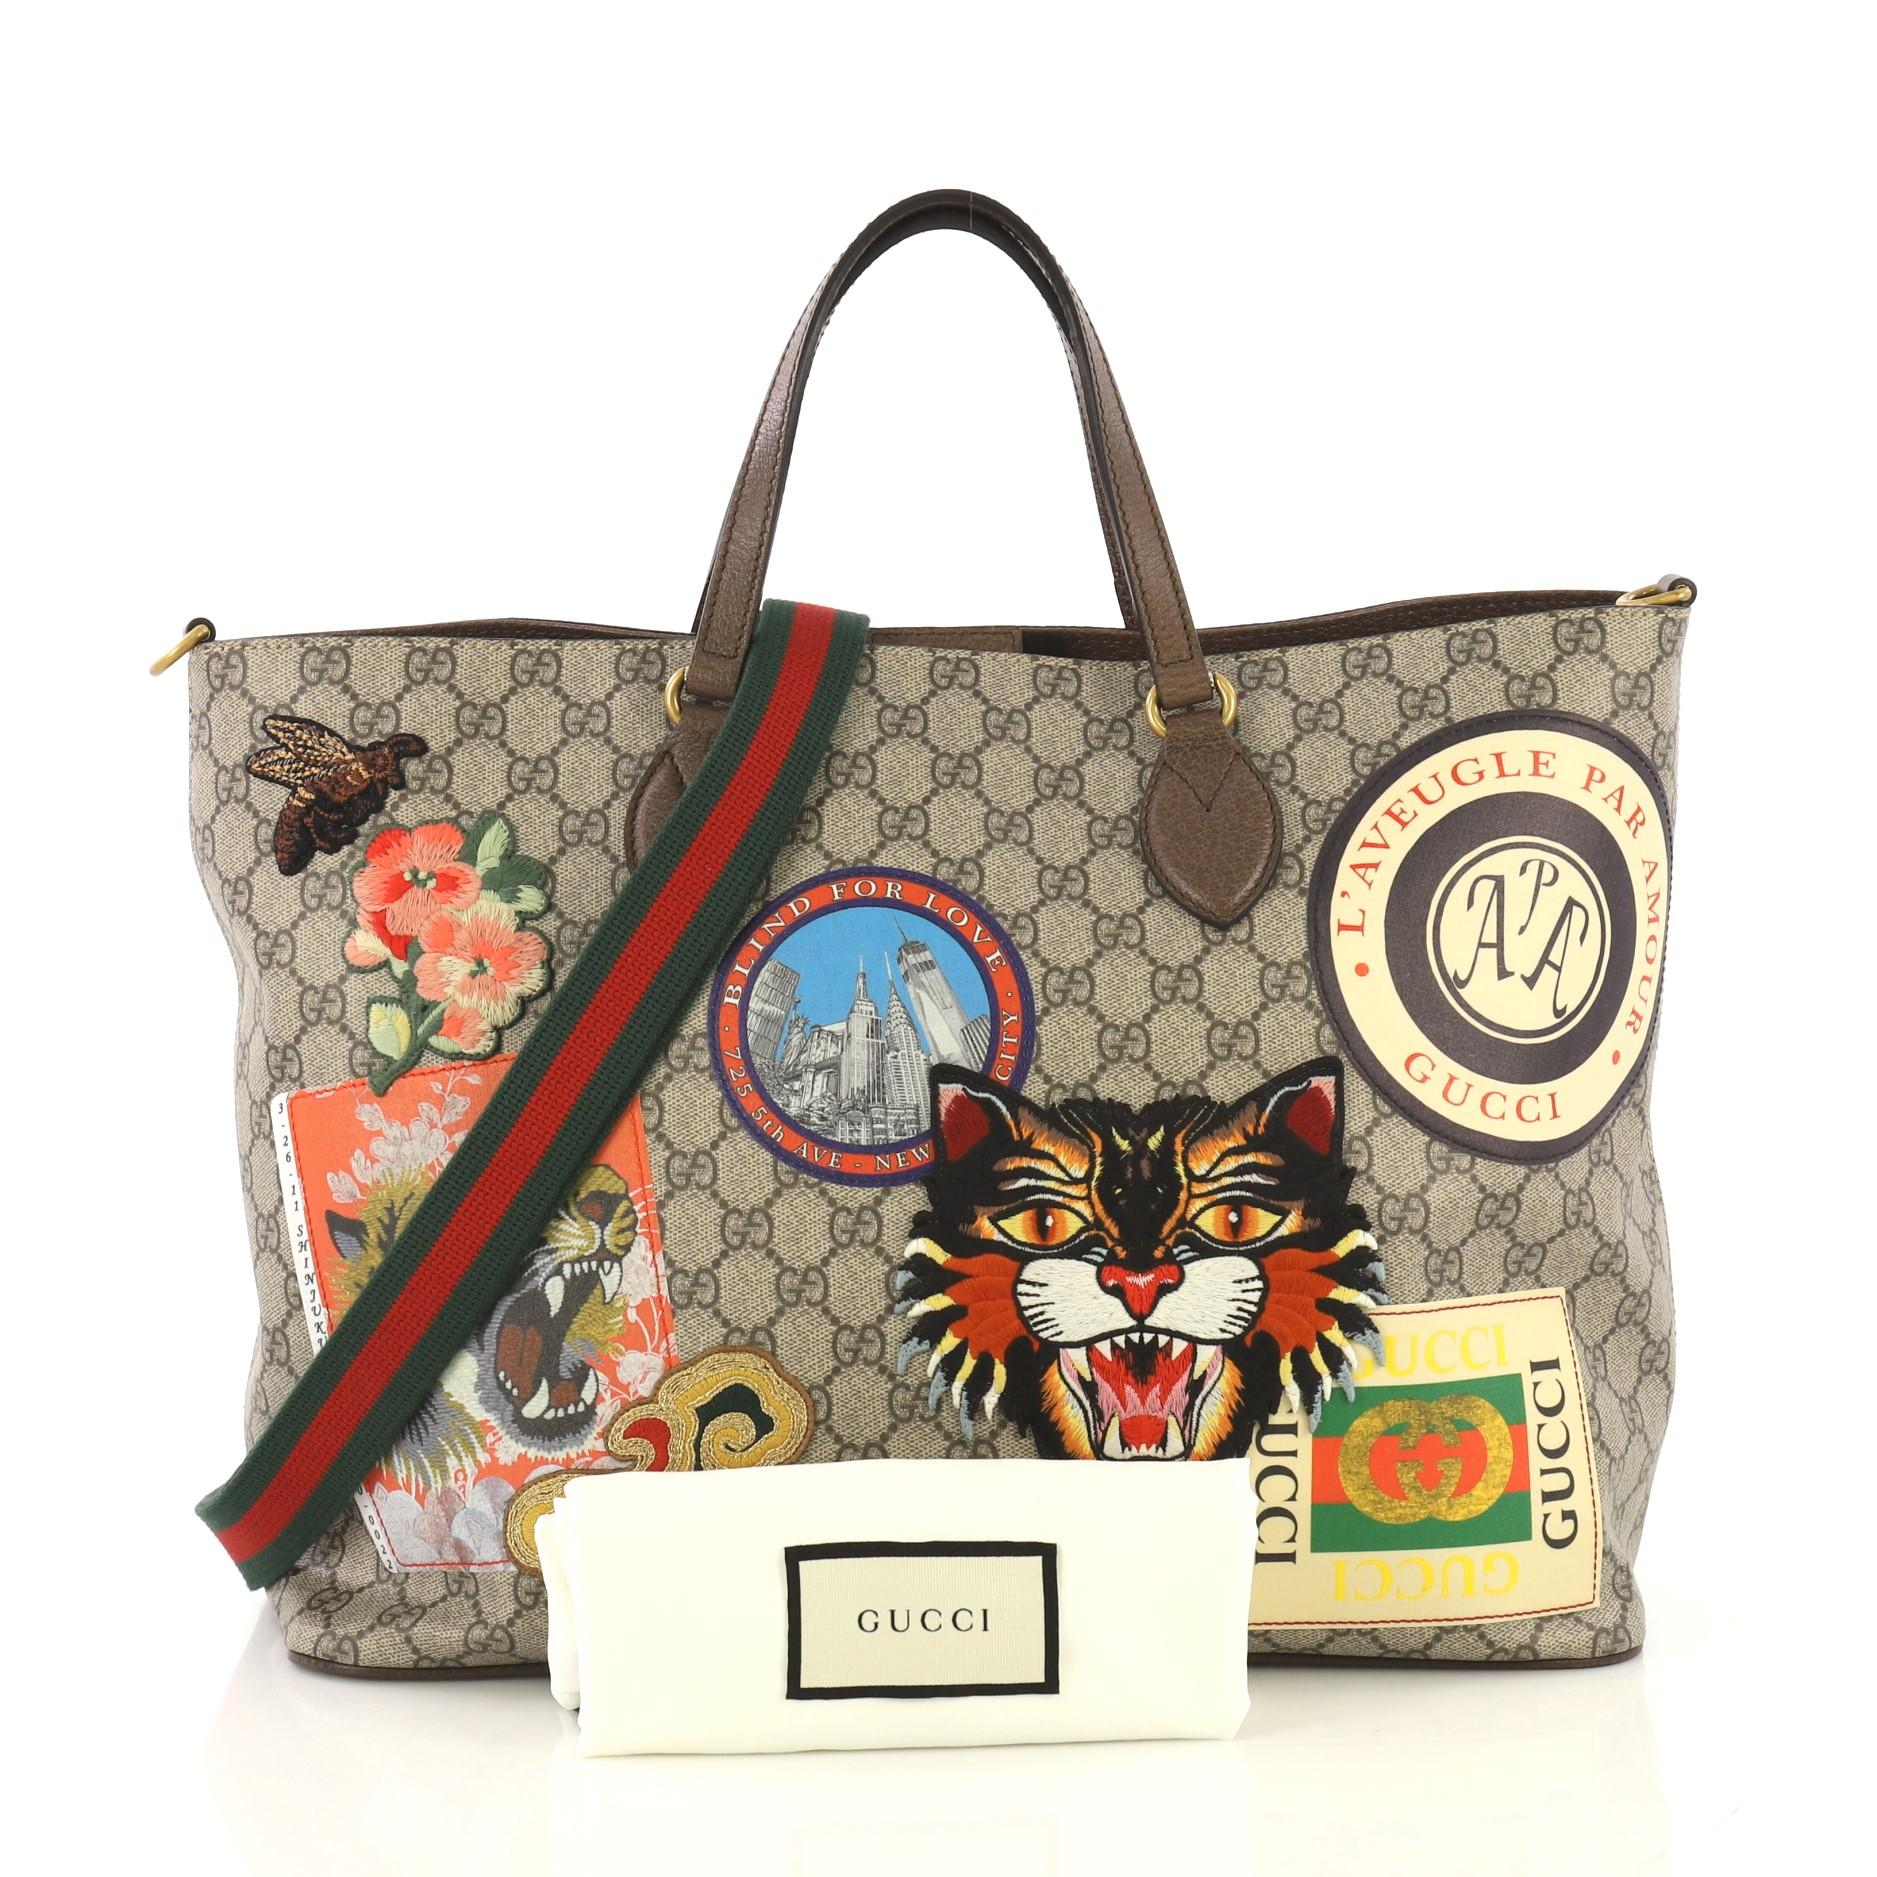 This Gucci Courrier Convertible Soft Open Tote GG Coated Canvas with Applique Large, crafted in beige GG coated canvas, features dual flat leather handles, embroidered appliqués of angry cat, clouds, bee and vintage Gucci logo, and aged gold-tone